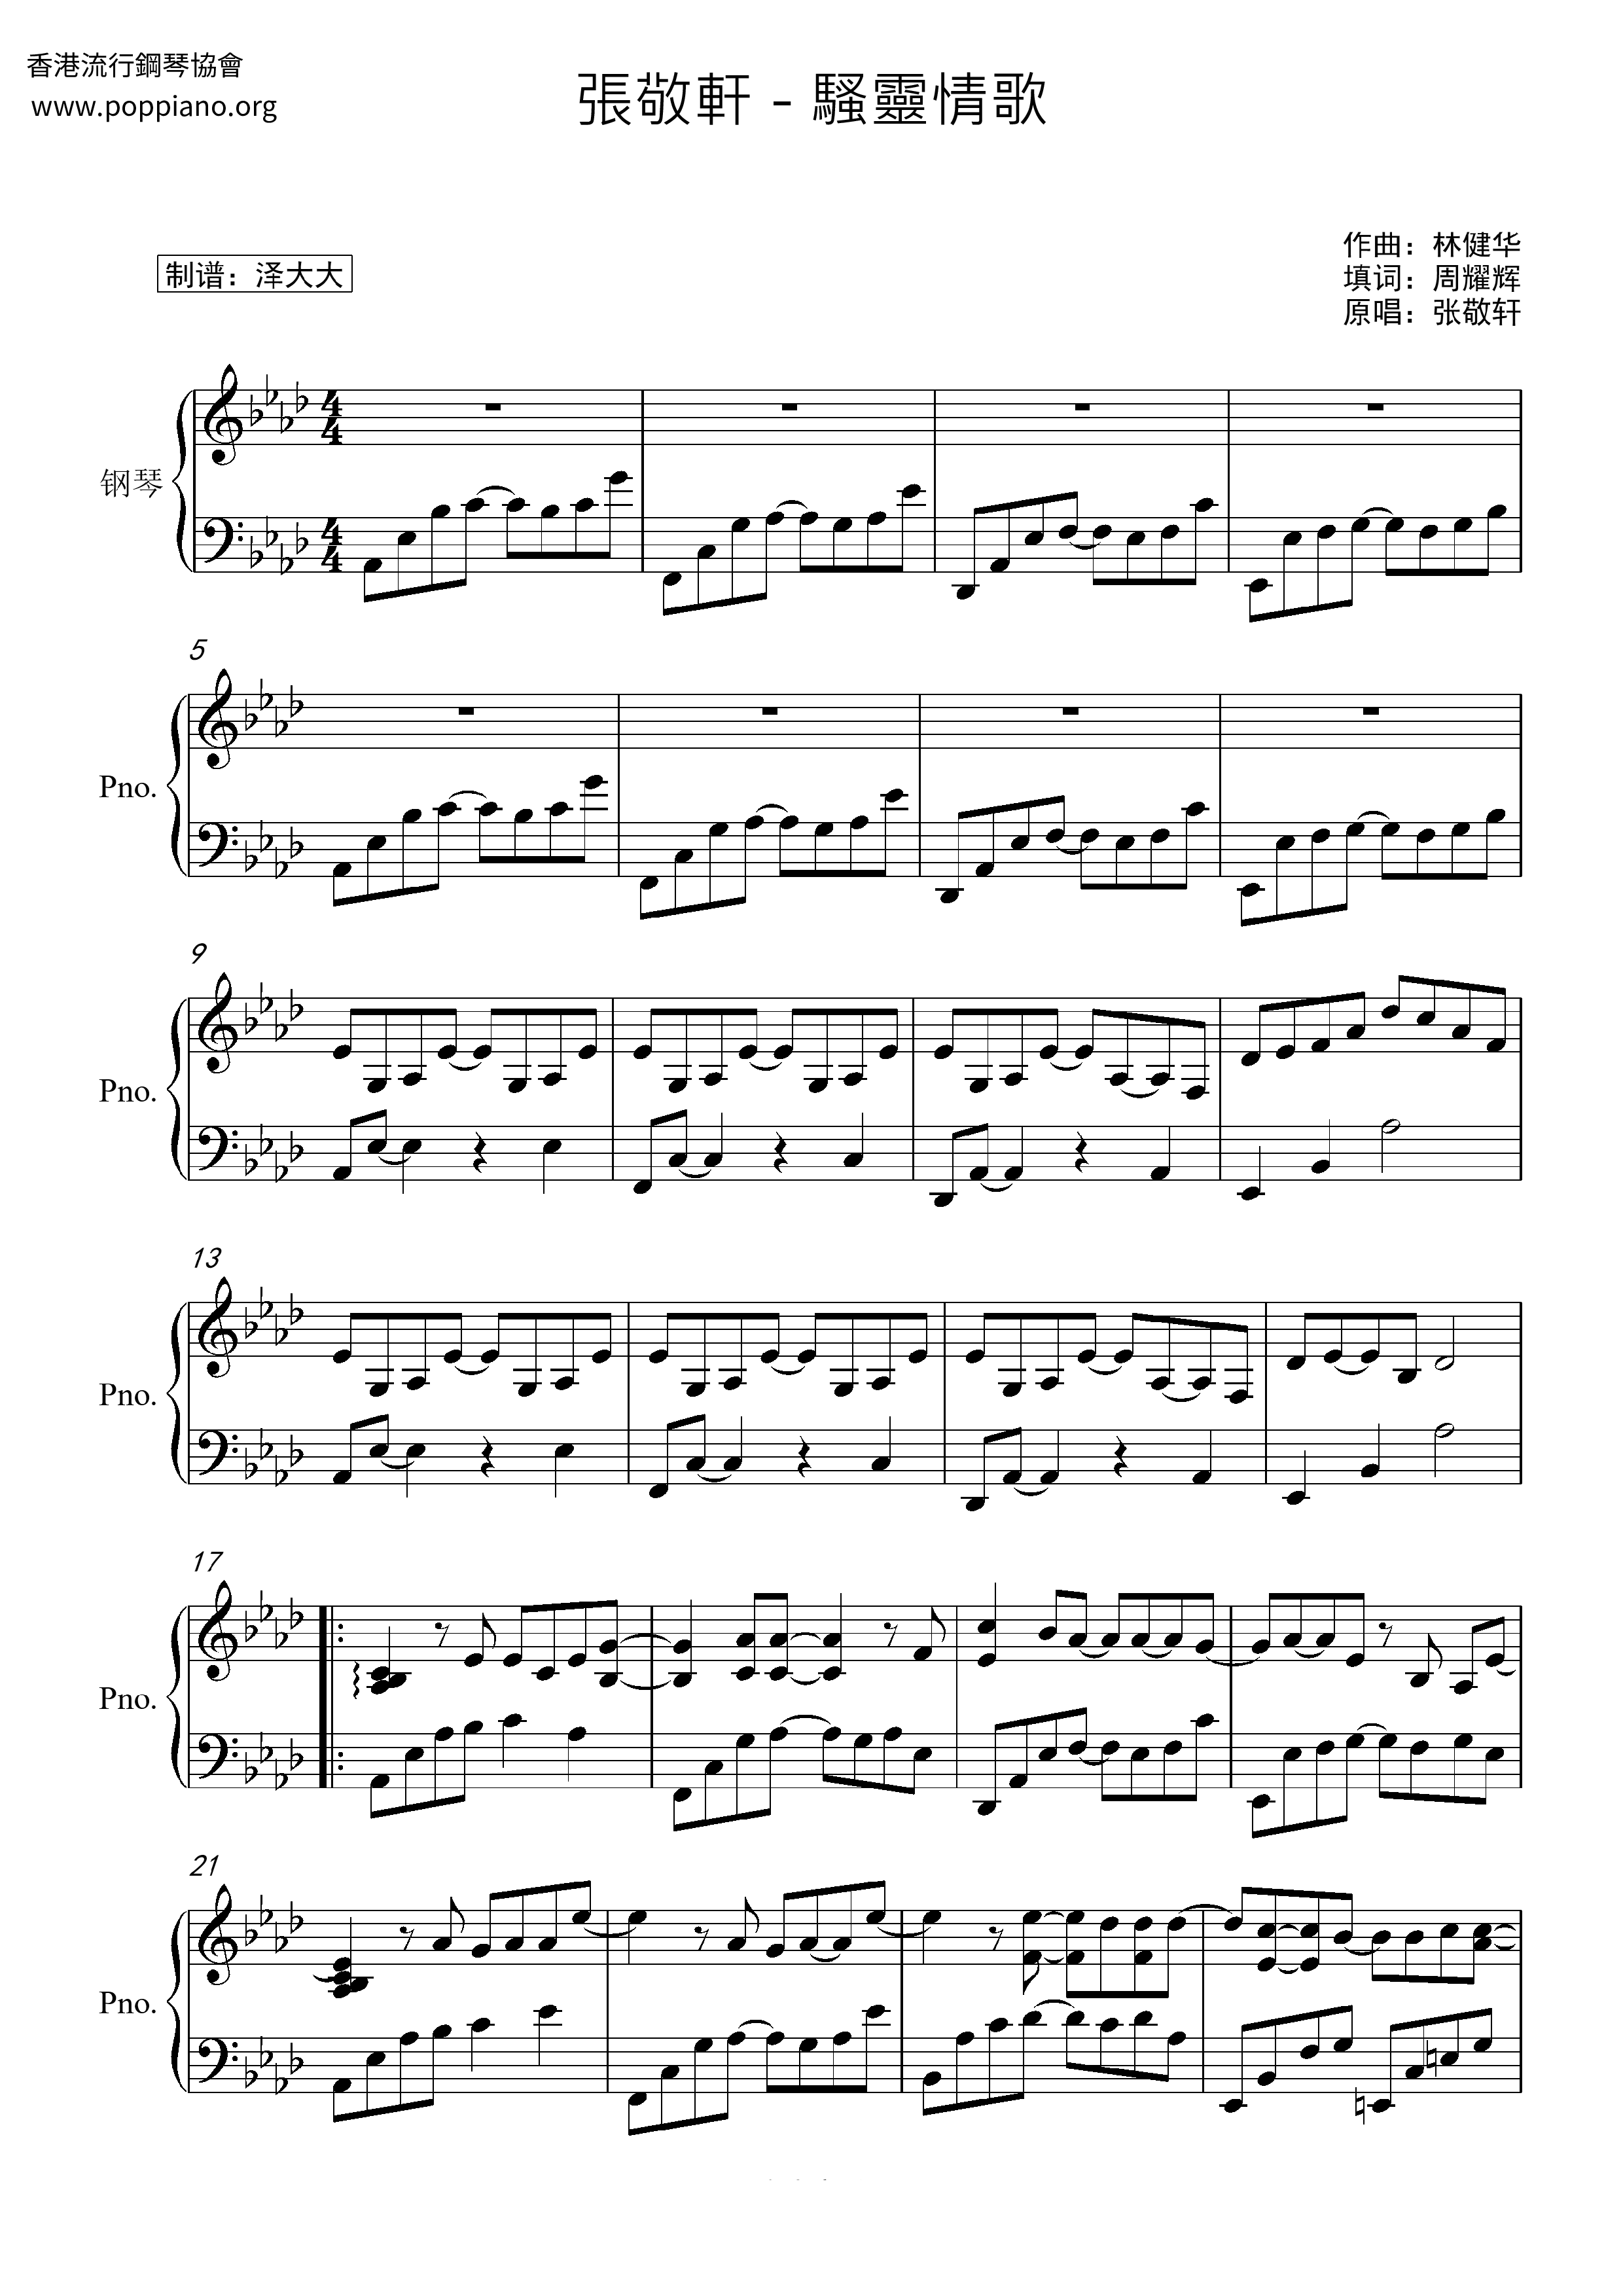 Sao Ling Love Song Score